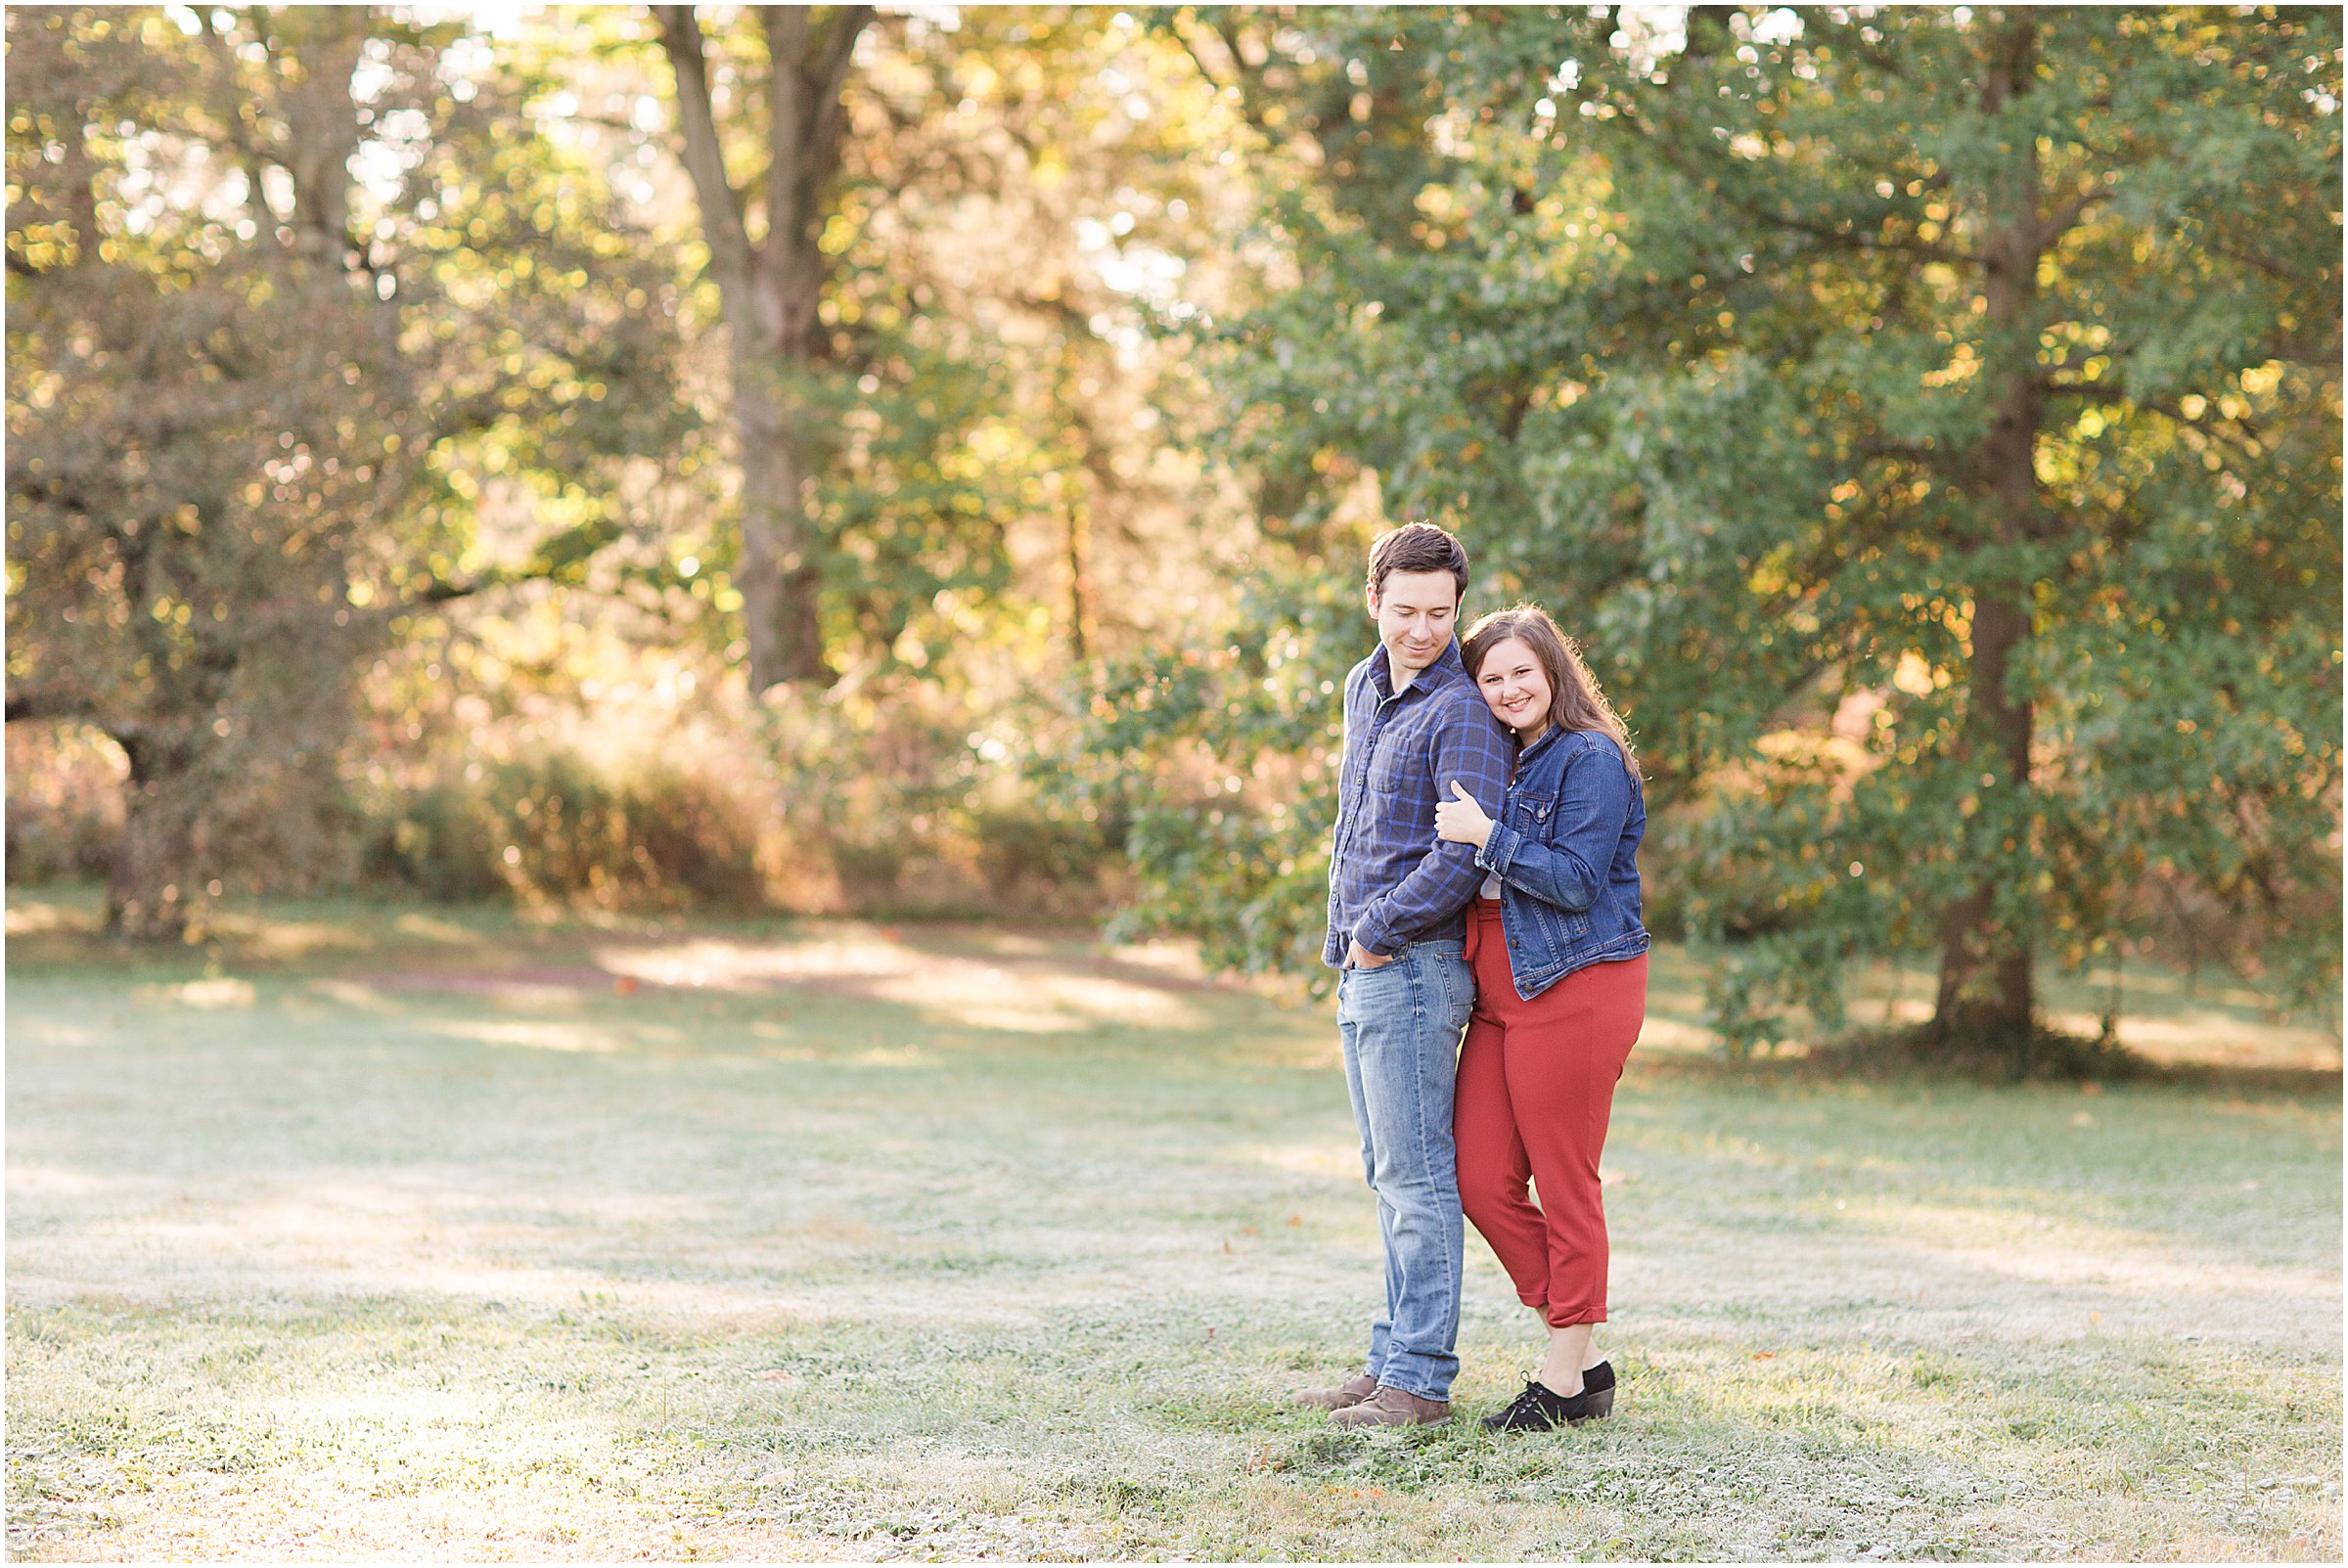 Holliday Park Engagement Session by Sami Renee_0009.jpg